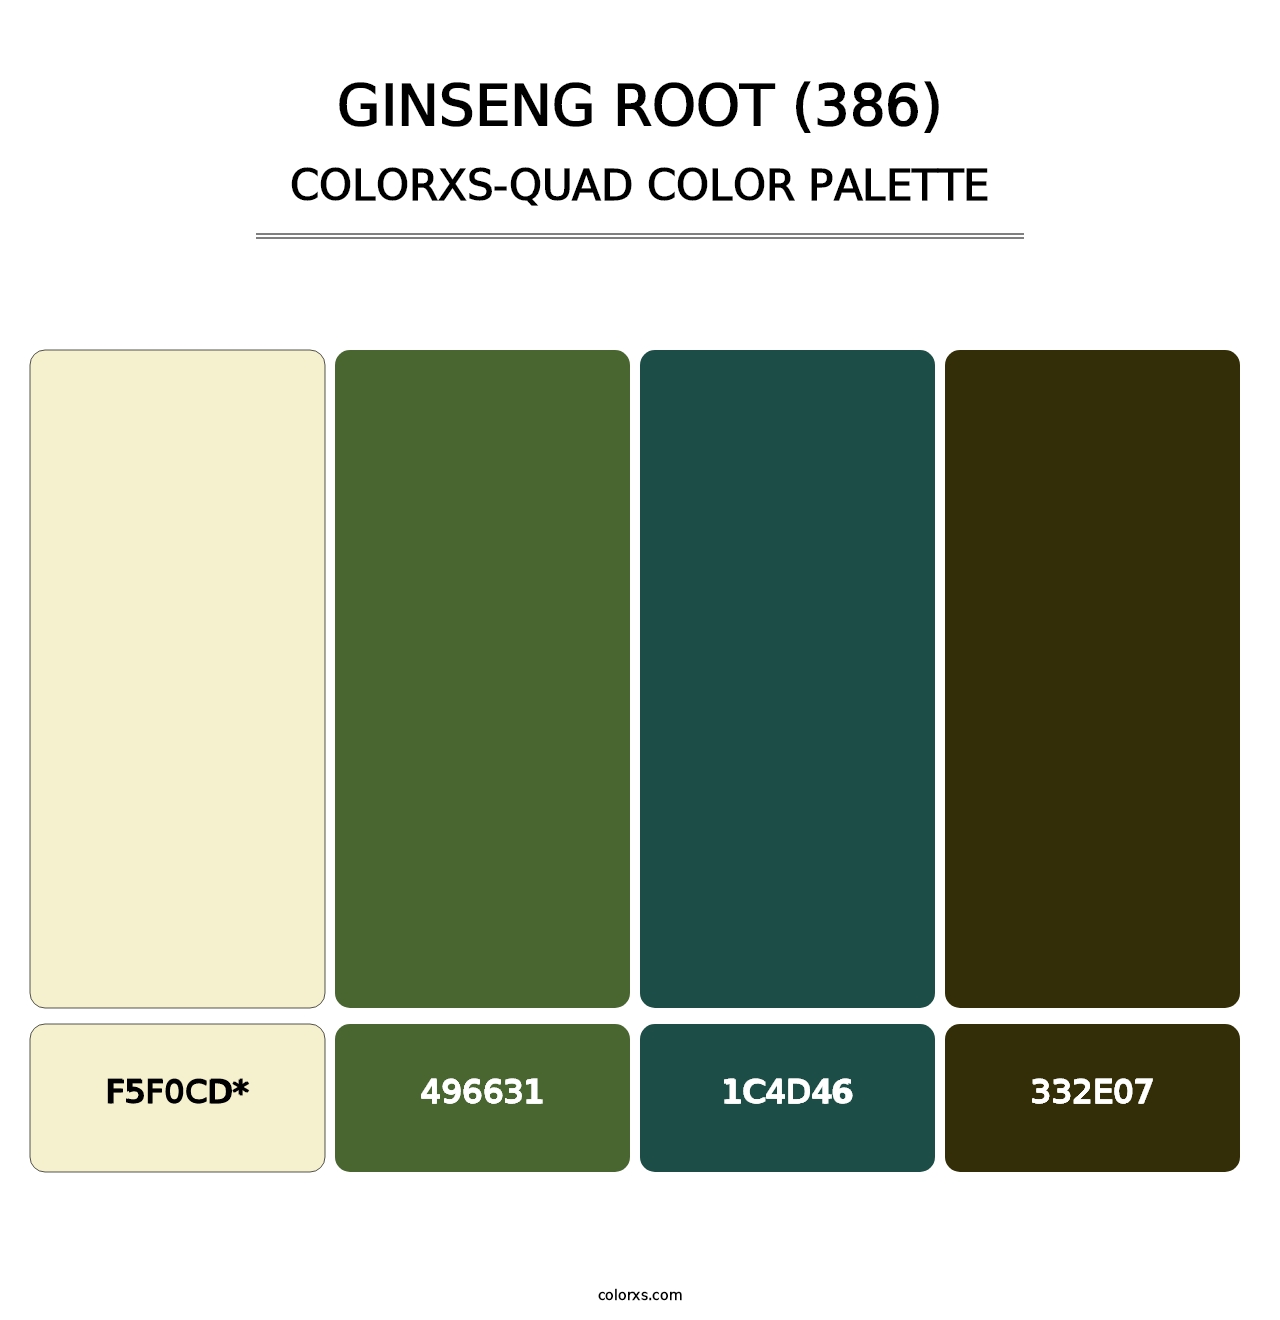 Ginseng Root (386) - Colorxs Quad Palette